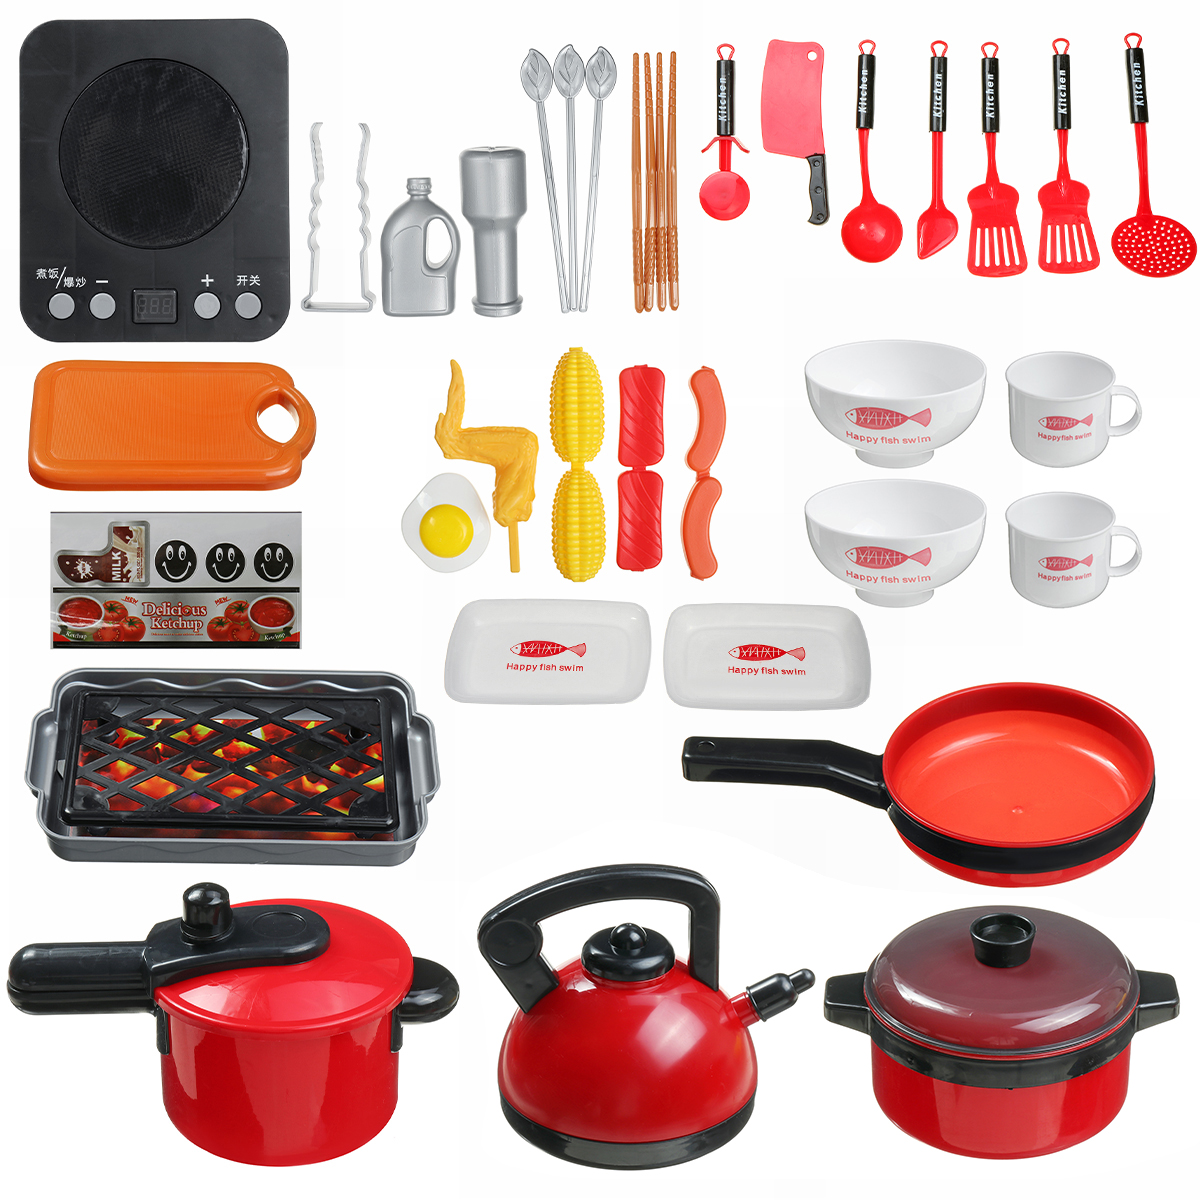 1636-Pcs-Kid-Play-House-Toy-ABS-Plastic-Kitchen-Cooking-Pots-Pans-Food-Dishes-Cookware-Toys-1627711-7